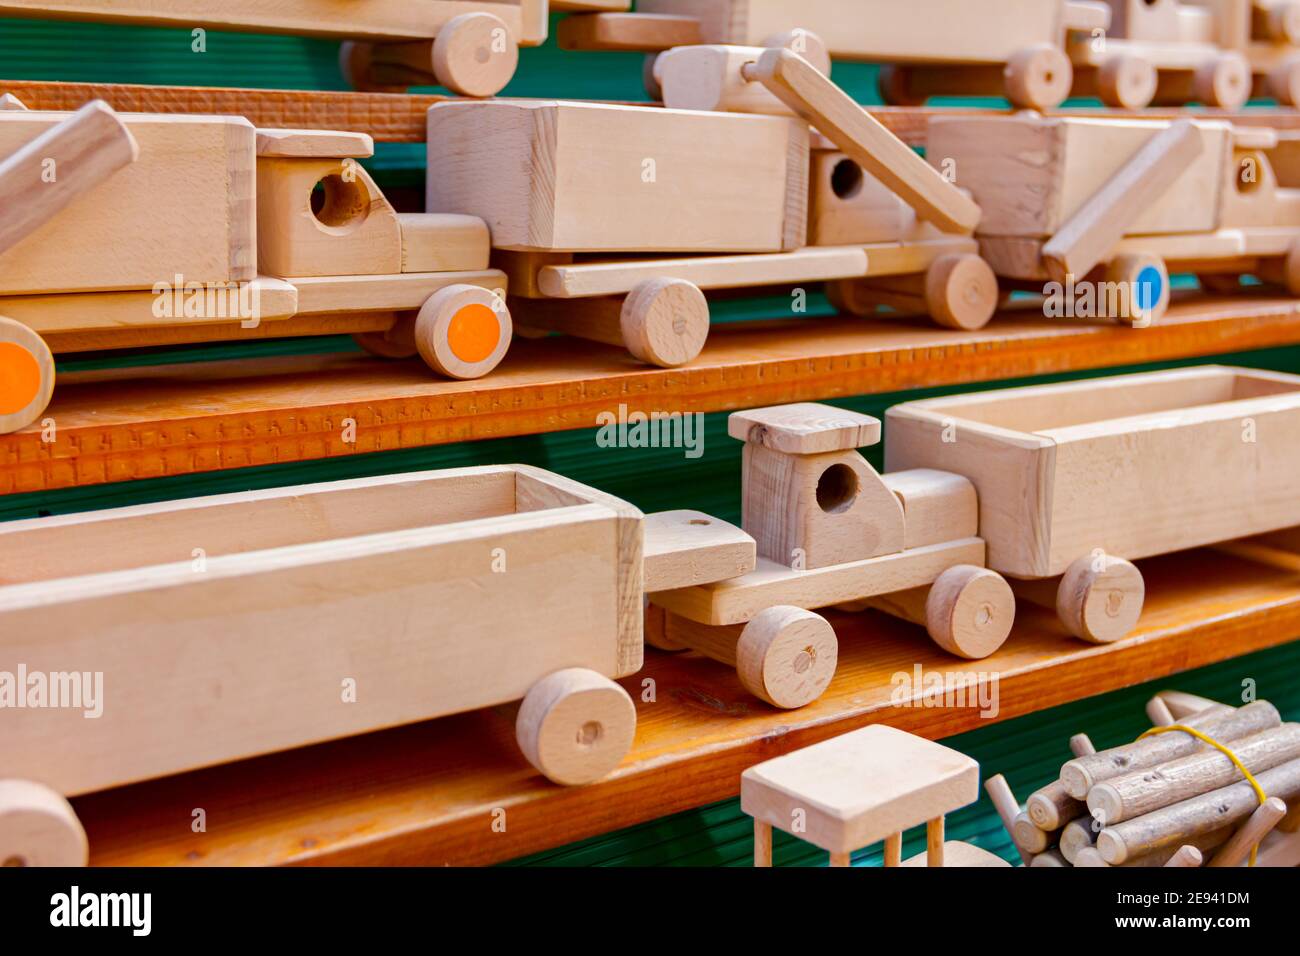 Children's eco handmade vintage wooden toys various models of train, truck,  car, vehicle Stock Photo - Alamy